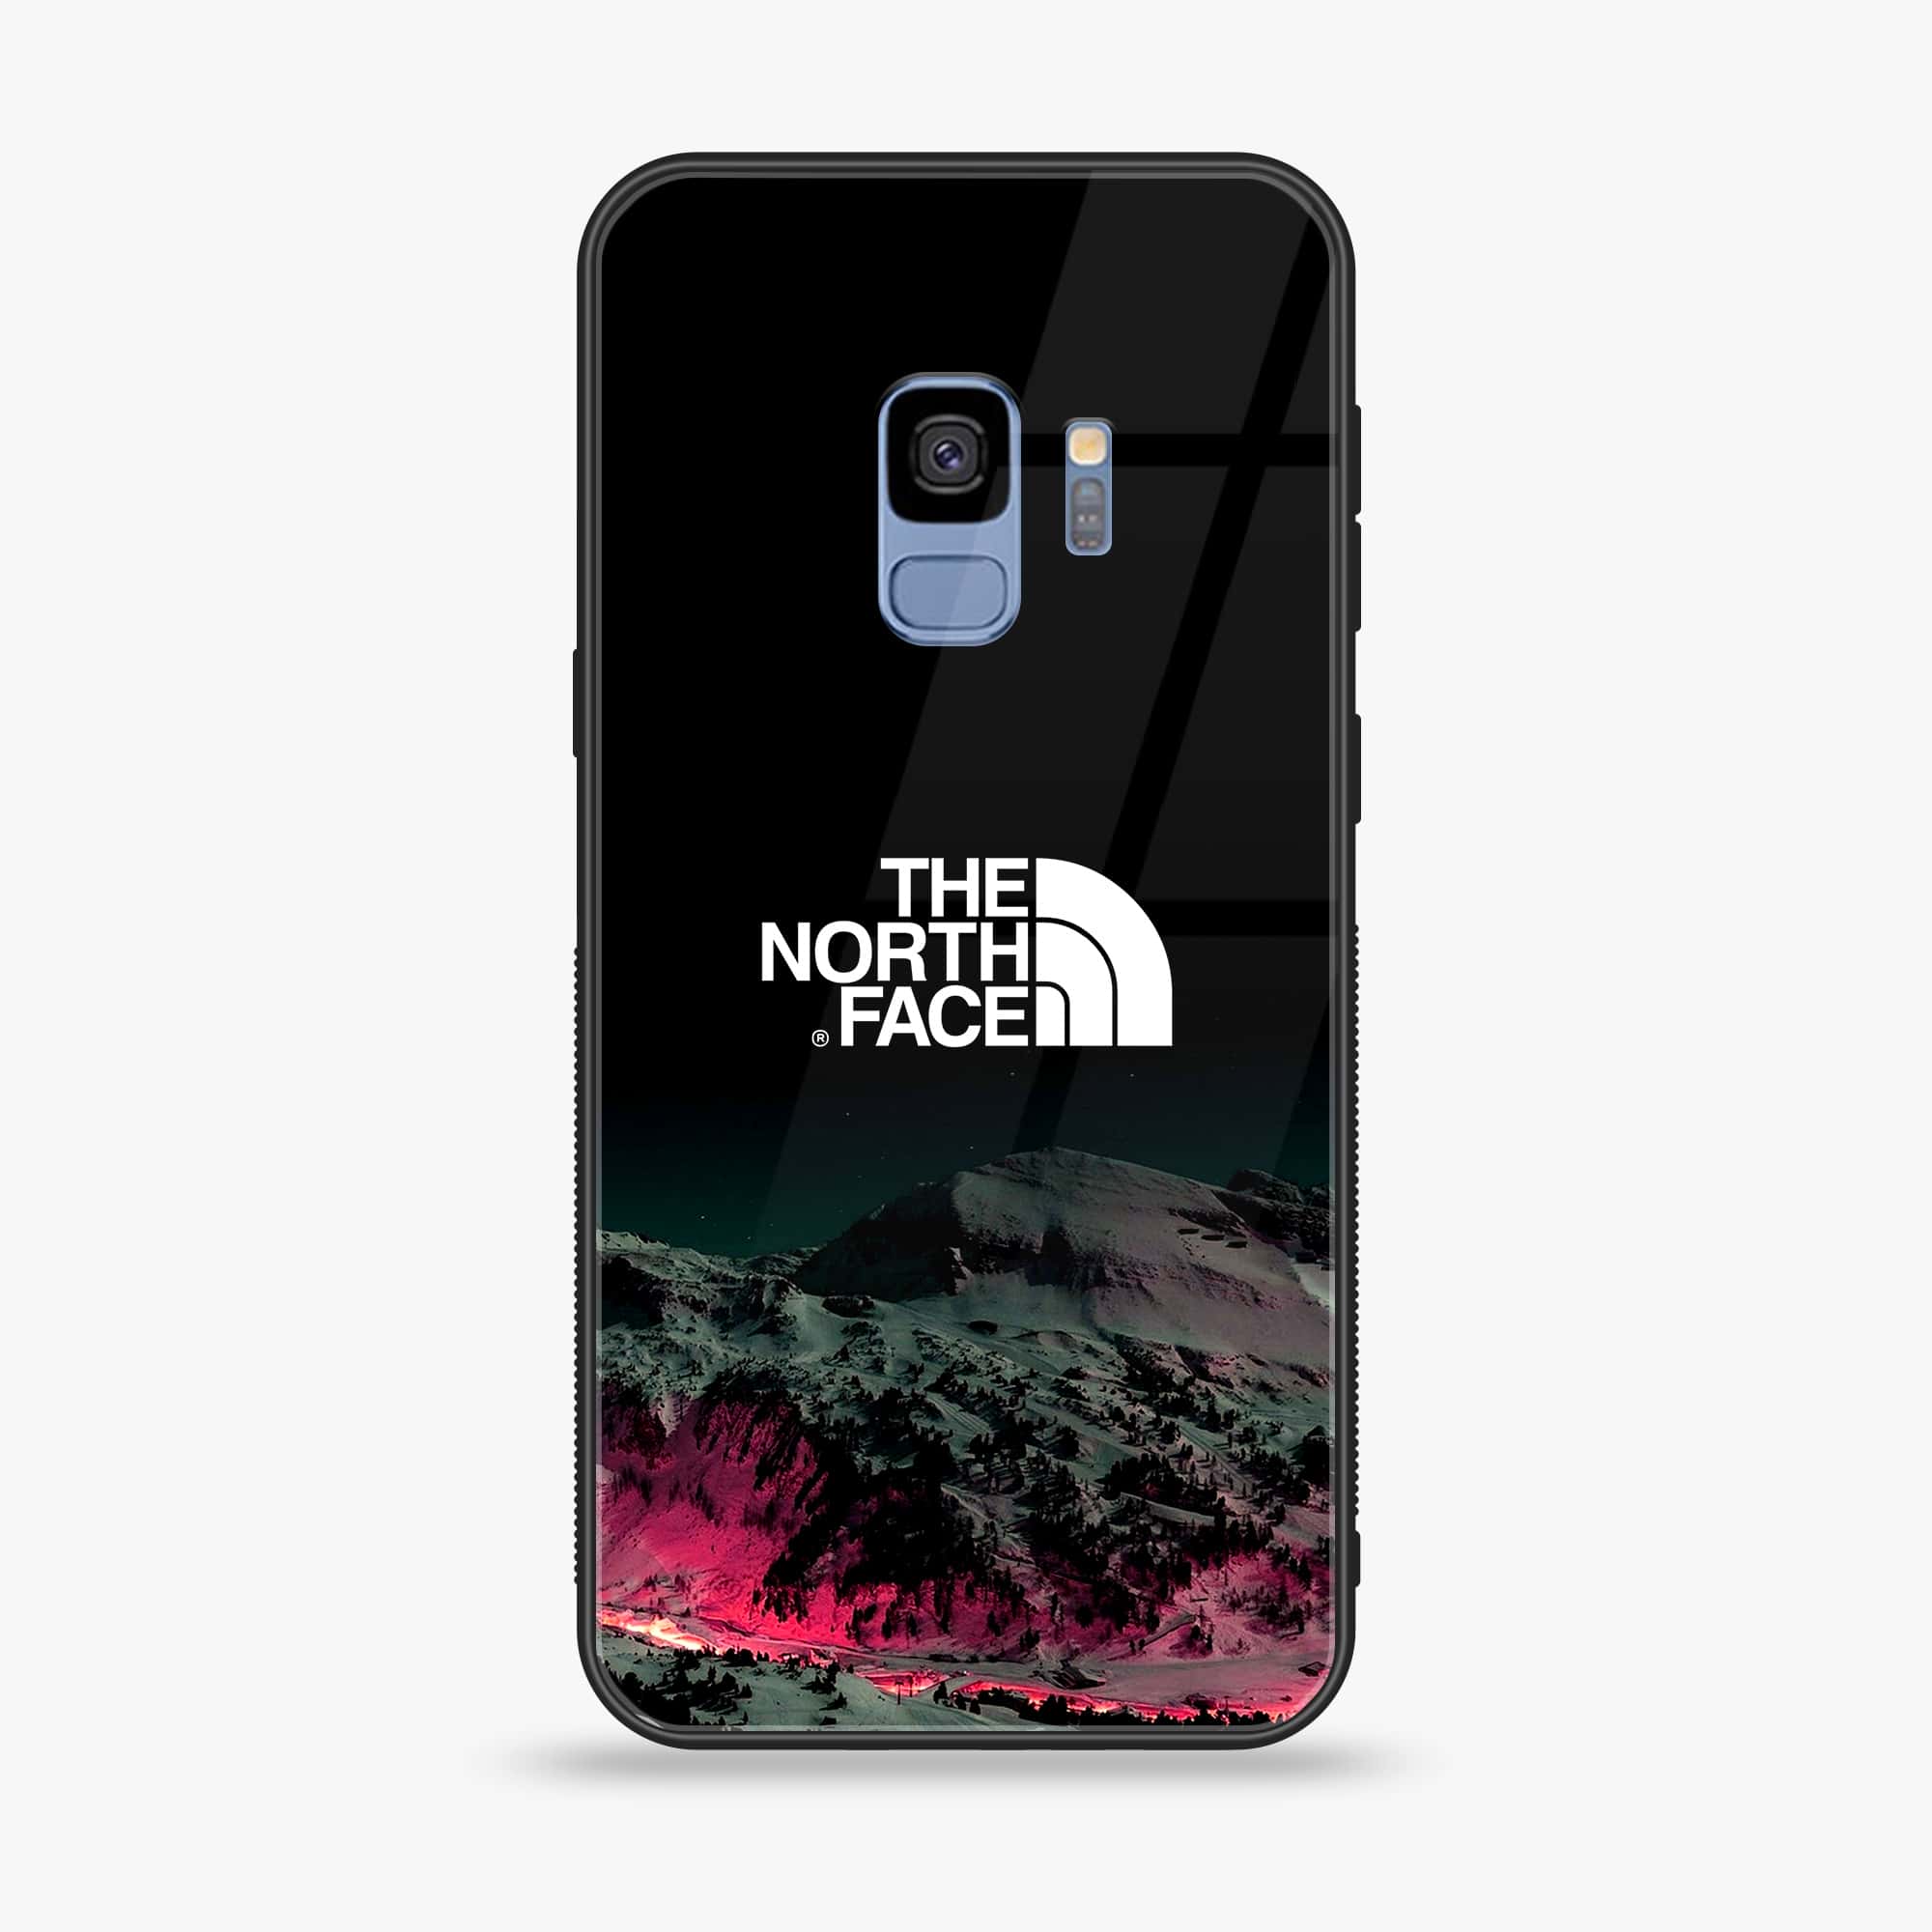 Galaxy S9 - The North Face Series - Premium Printed Glass soft Bumper shock Proof Case